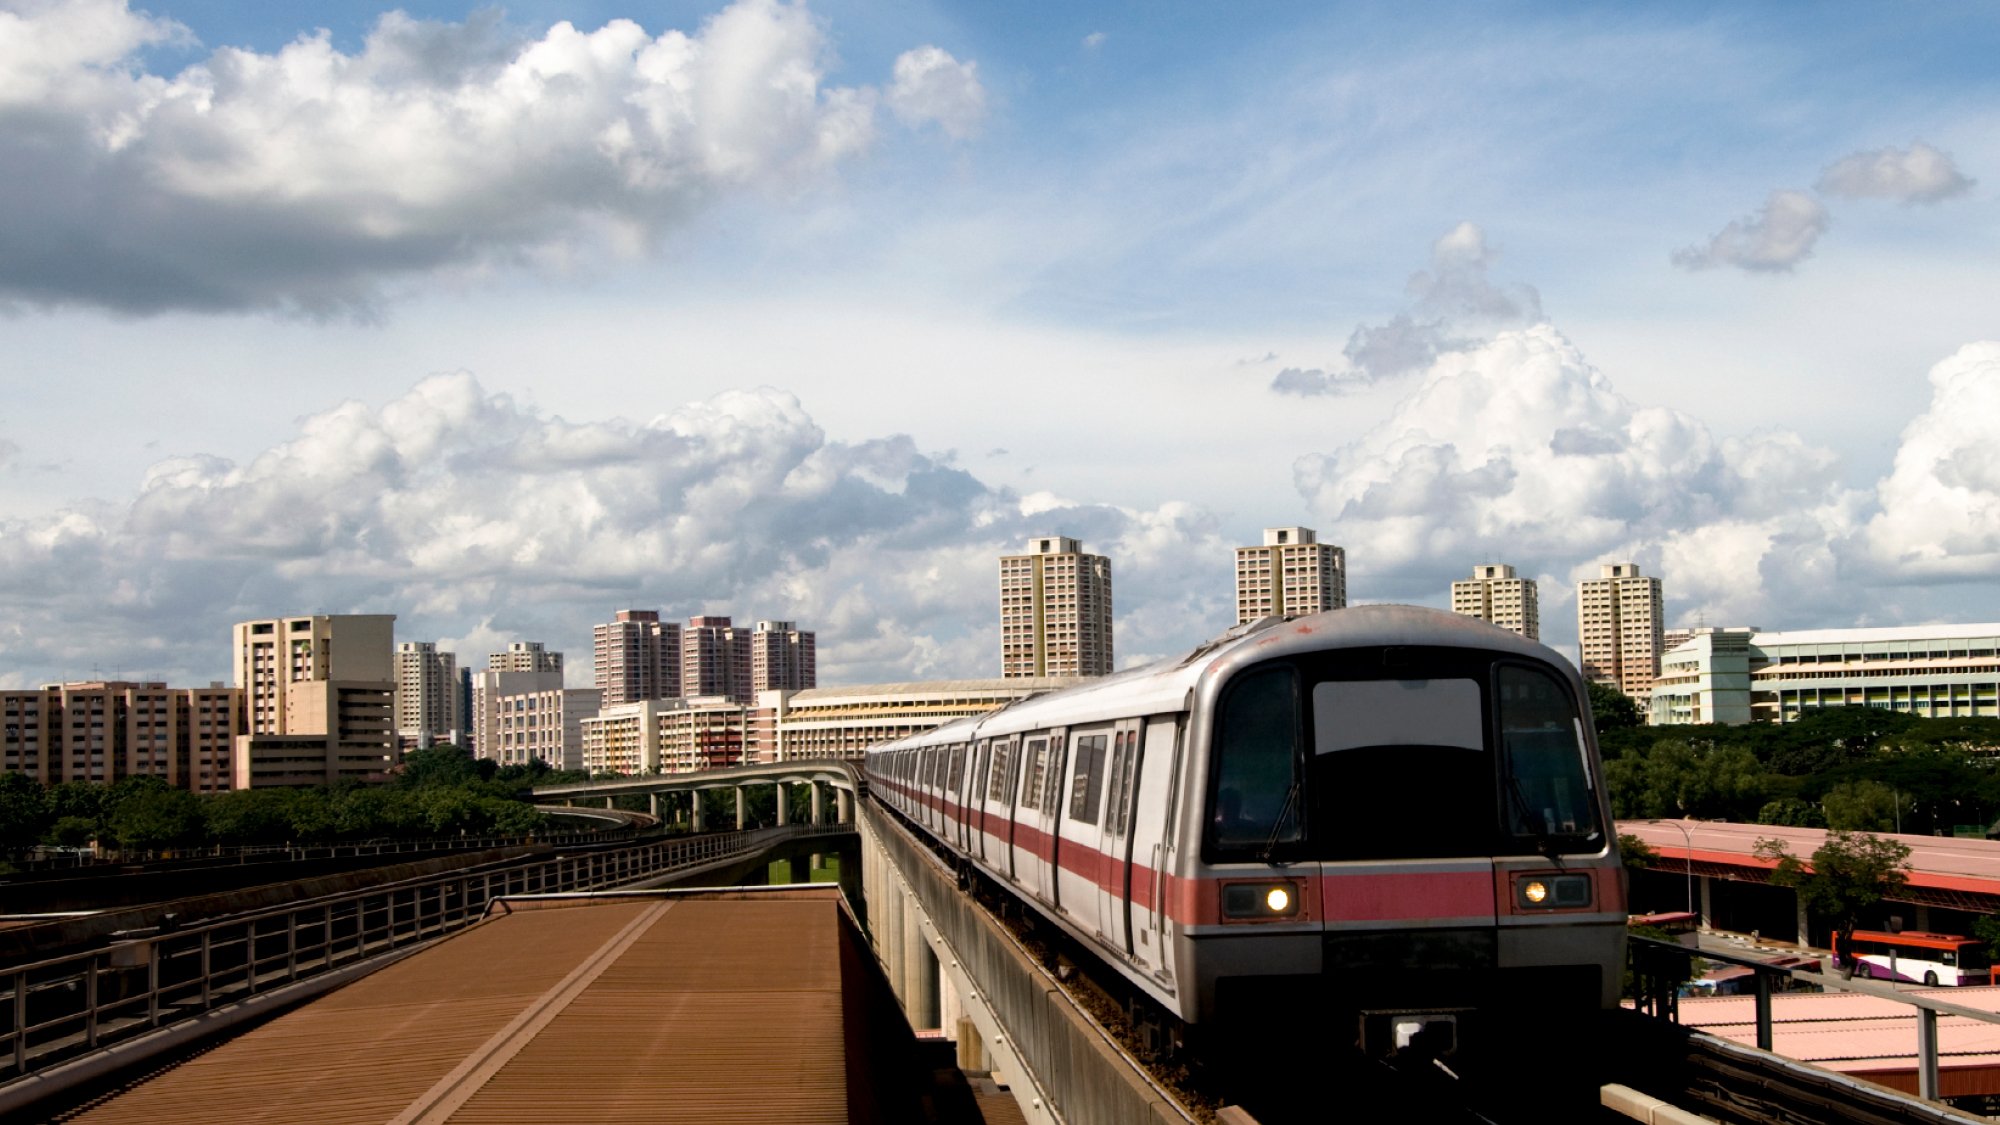 Daytime photograph of Singapore city with train on platform in foreground